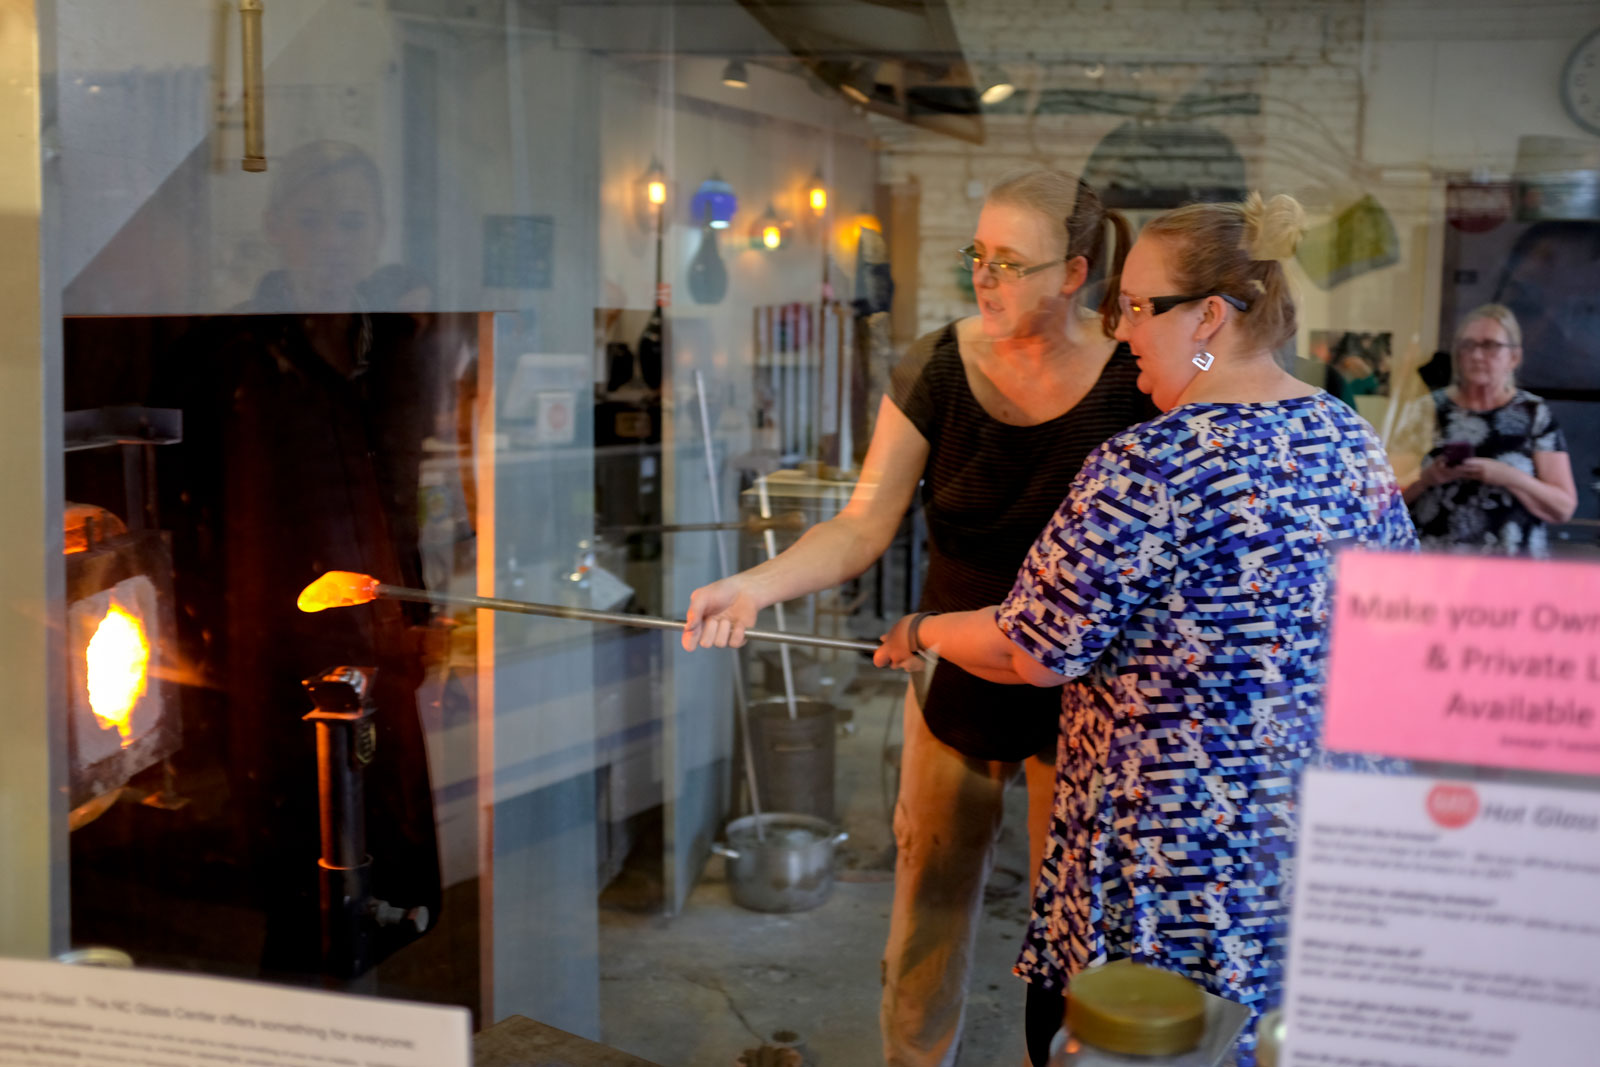 A glass blowing class in the River Arts District